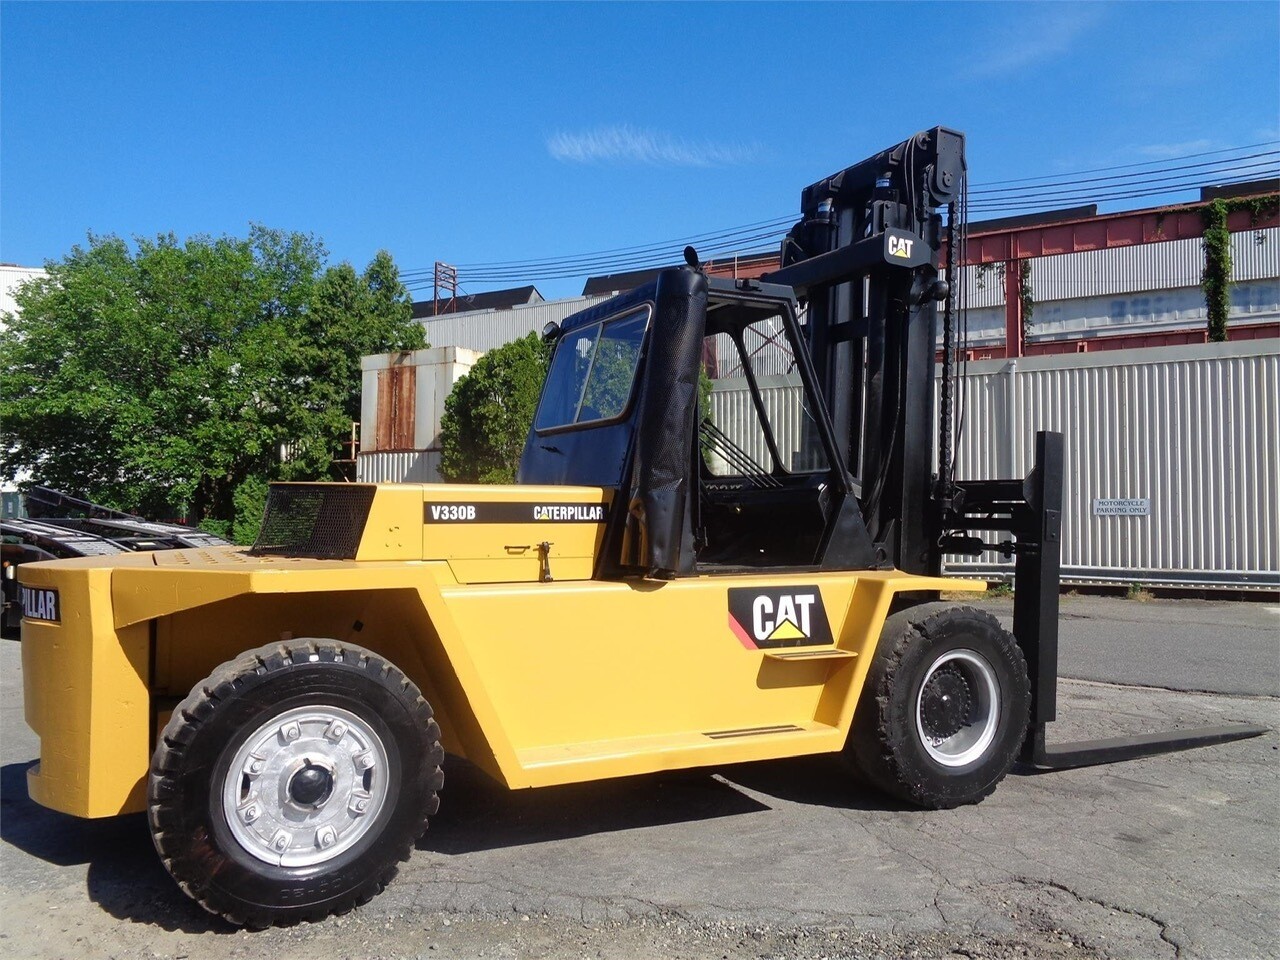 33,000 lbs Cat Air-Tire Forklift For Sale